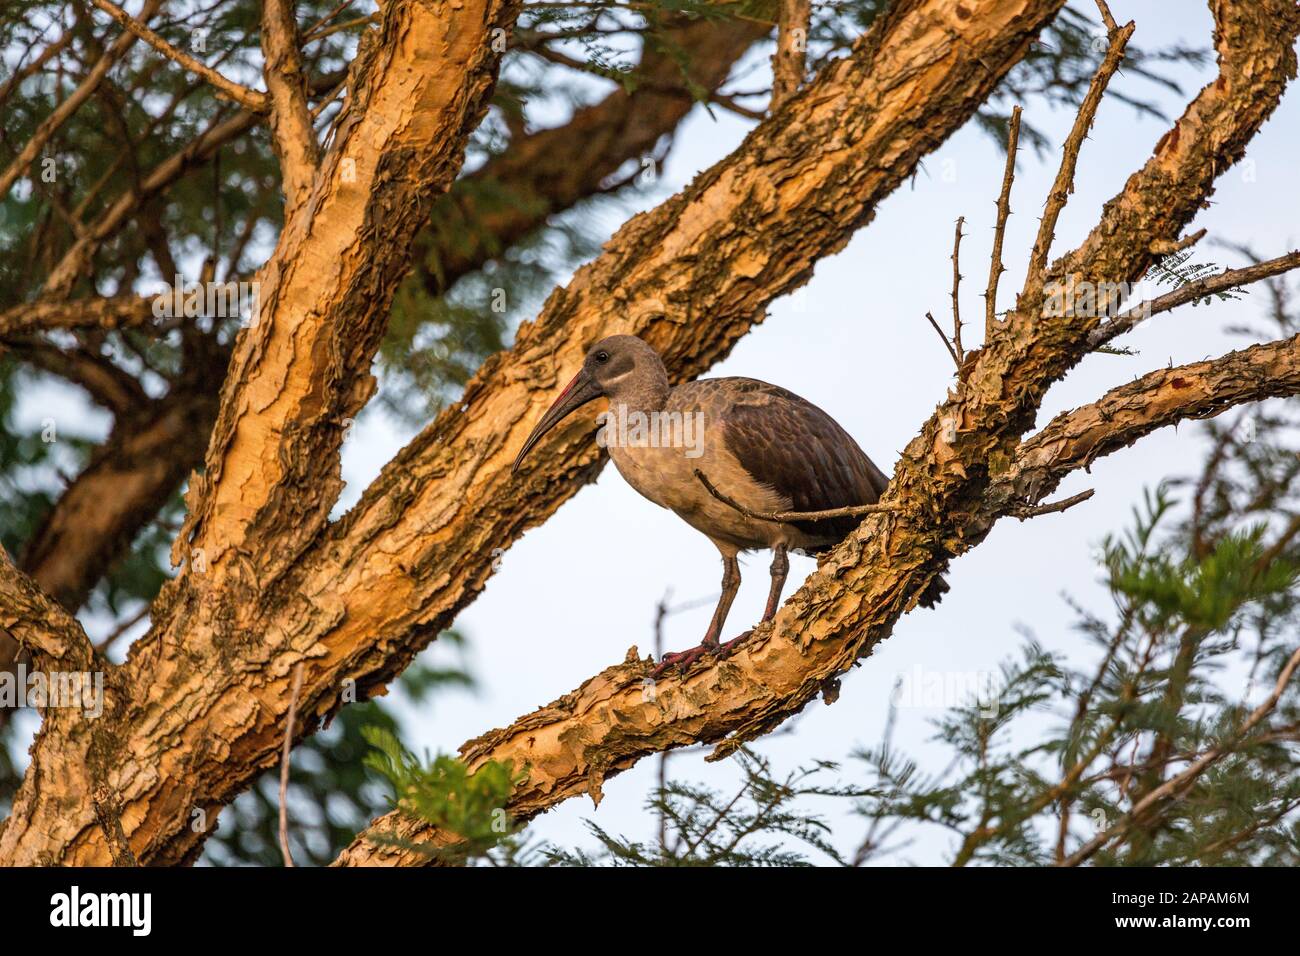 Hadada ibis (Bostrychia hagedash) on a tree in the morning light, South Africa Stock Photo